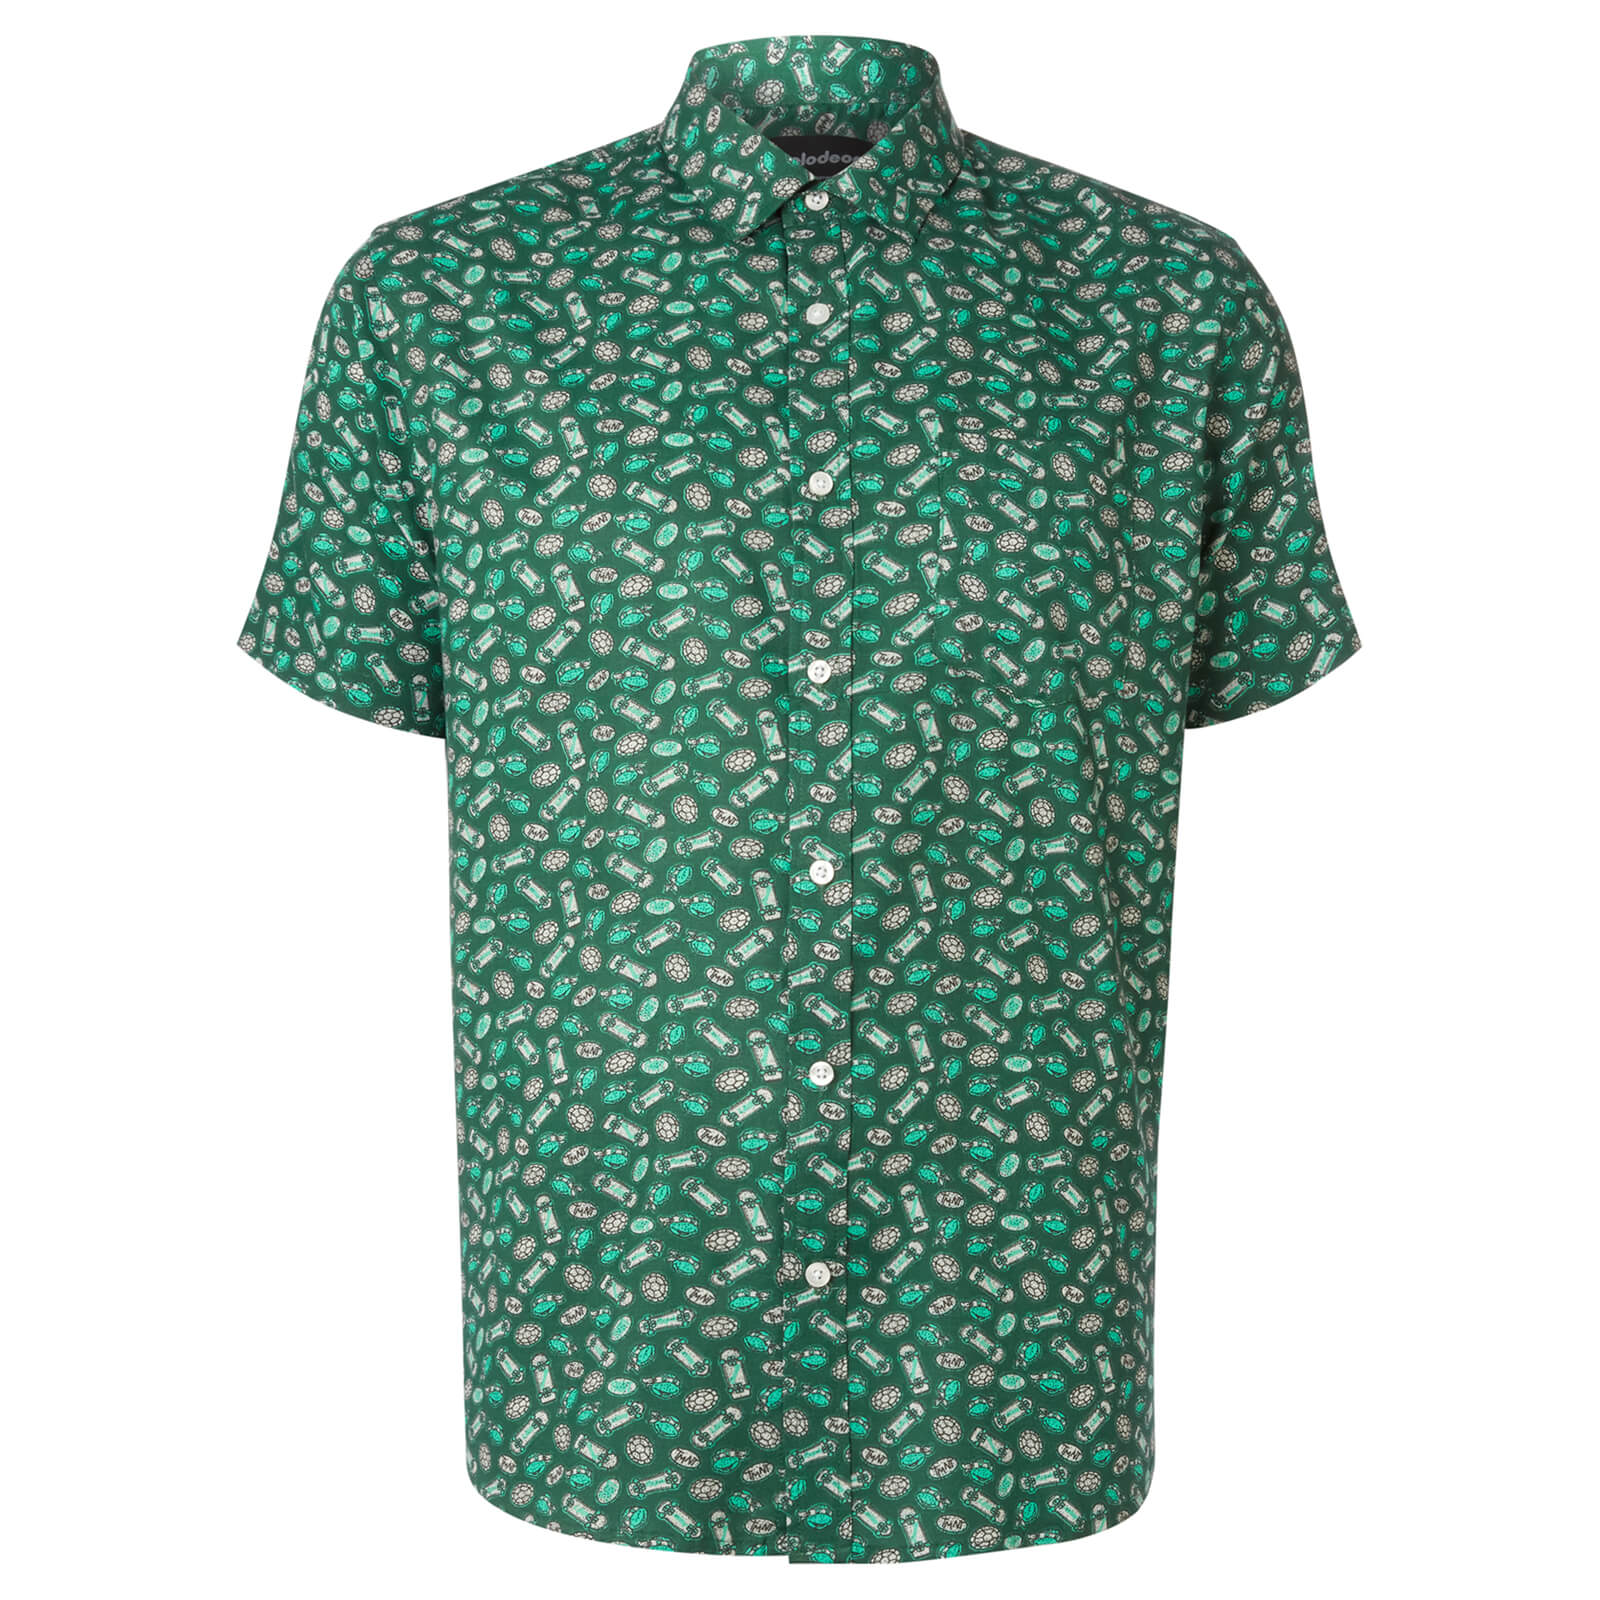 Limited Edition TNMT Ditsy Printed Shirt - Zavvi Exclusive - S